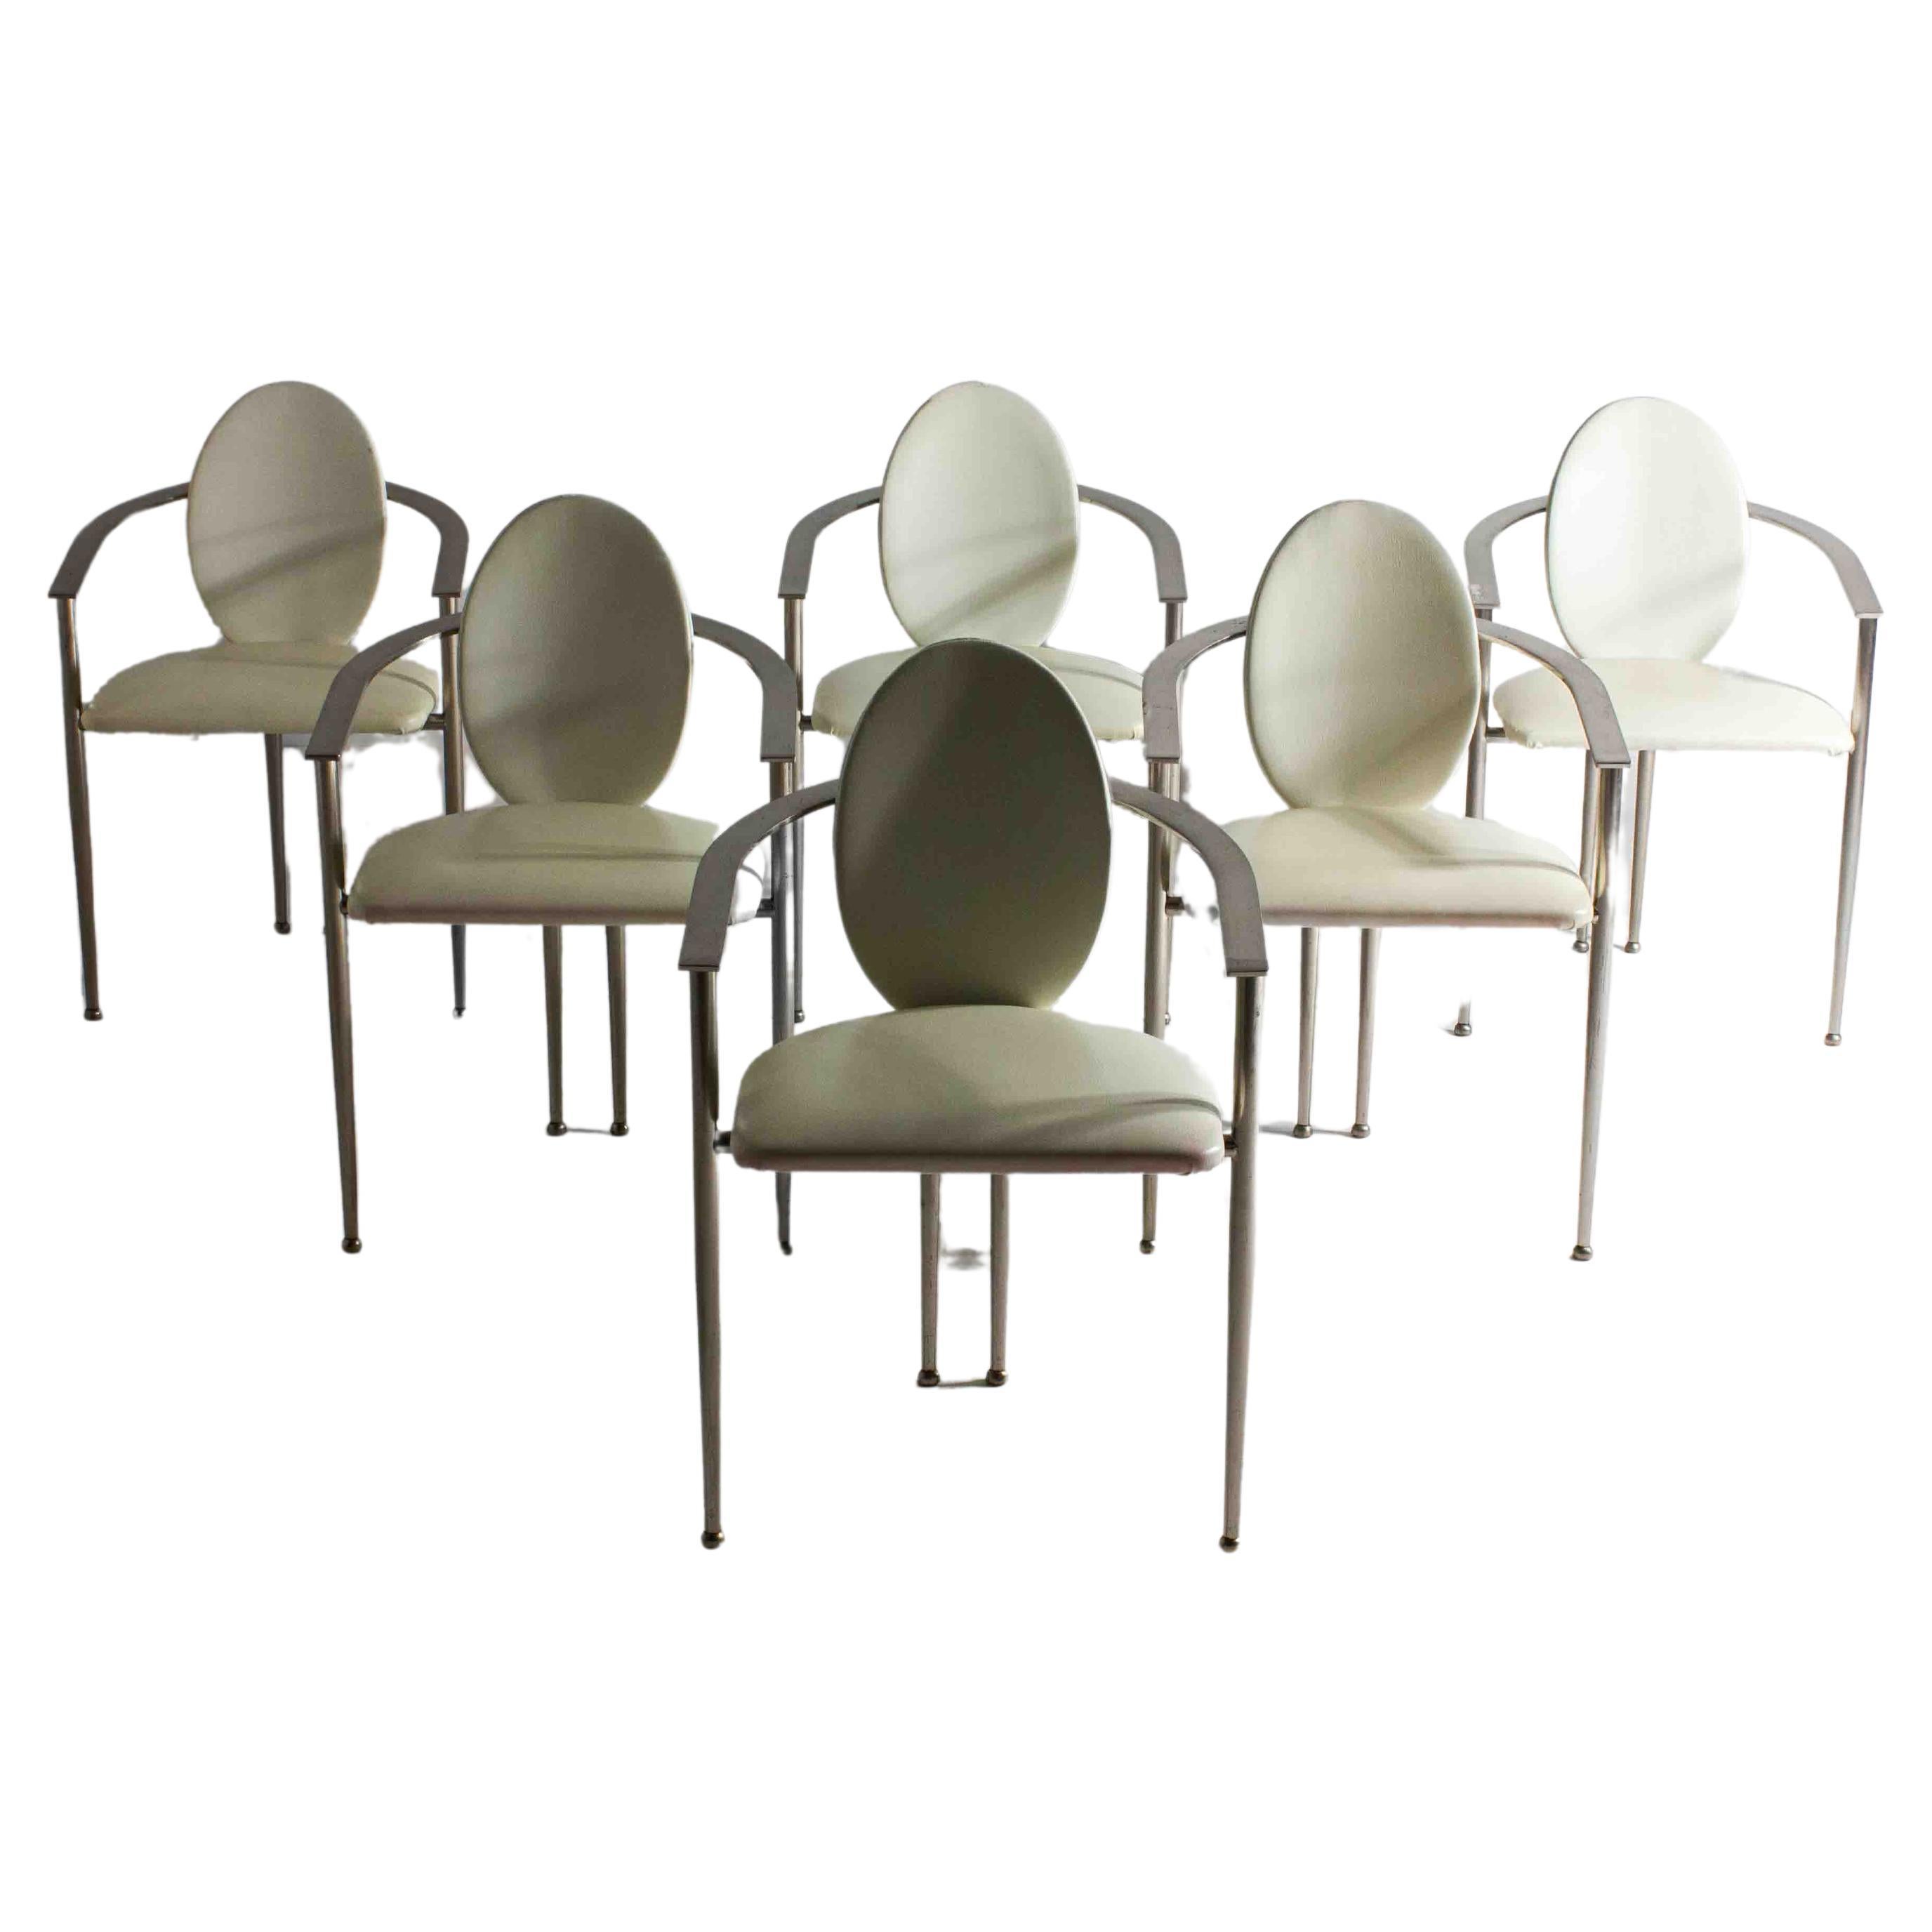 Postmodern dining chairs in steel and white leather, Belgium 1980s For Sale